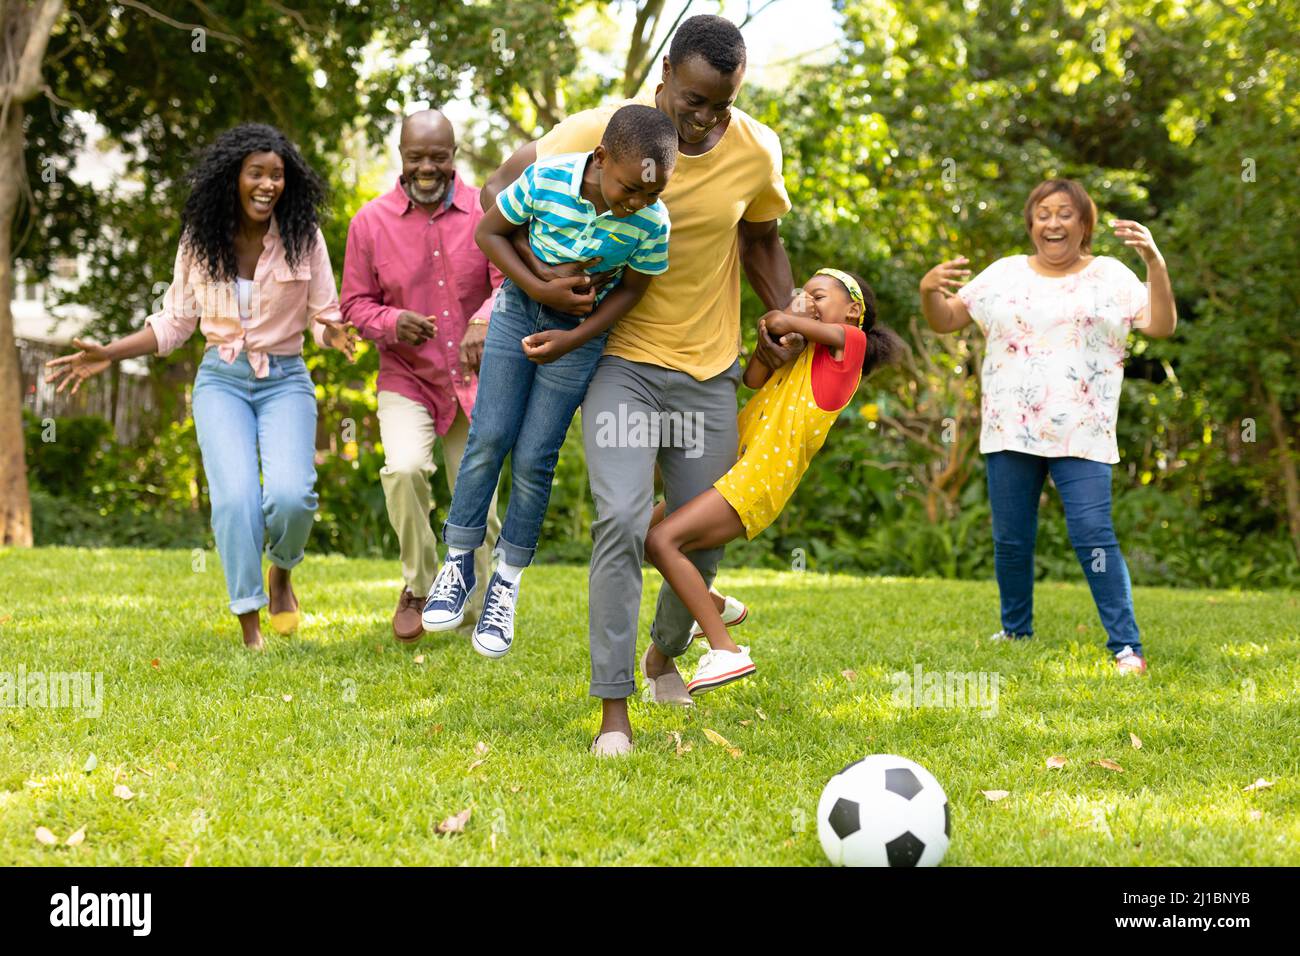 family playing sports together